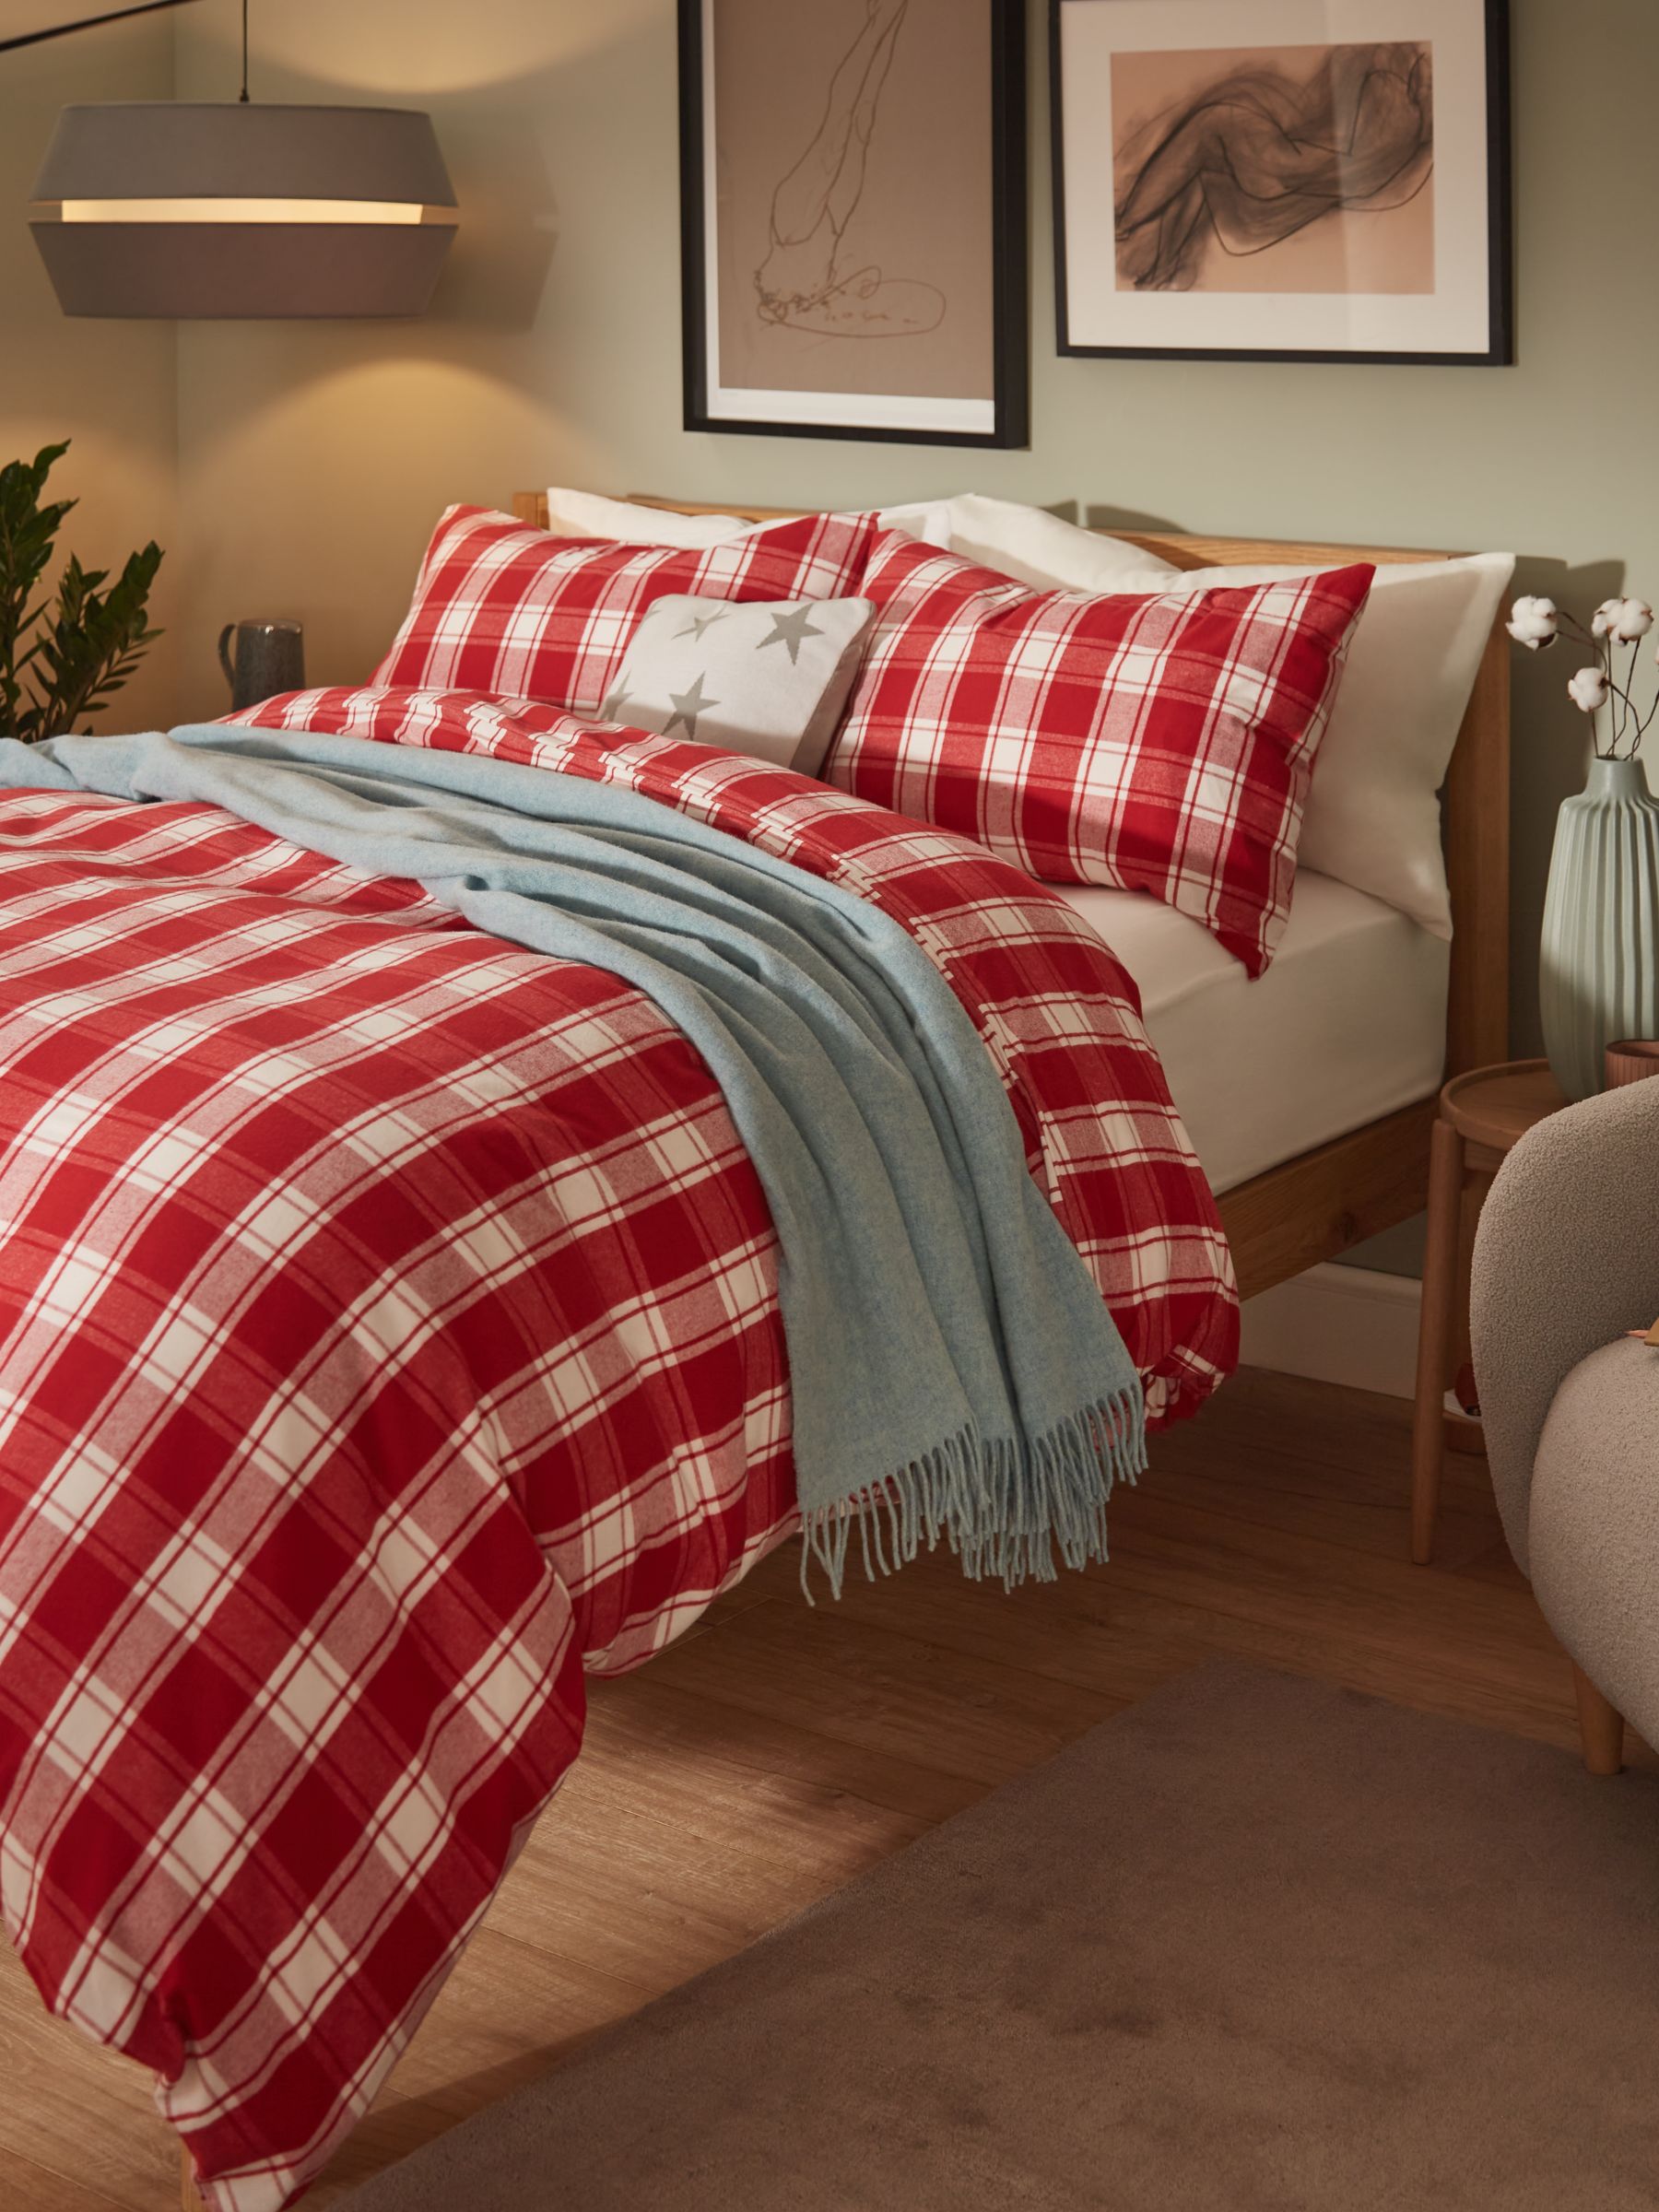 Brushed Check Duvet Cover Set, Red Brown Duvet Covers